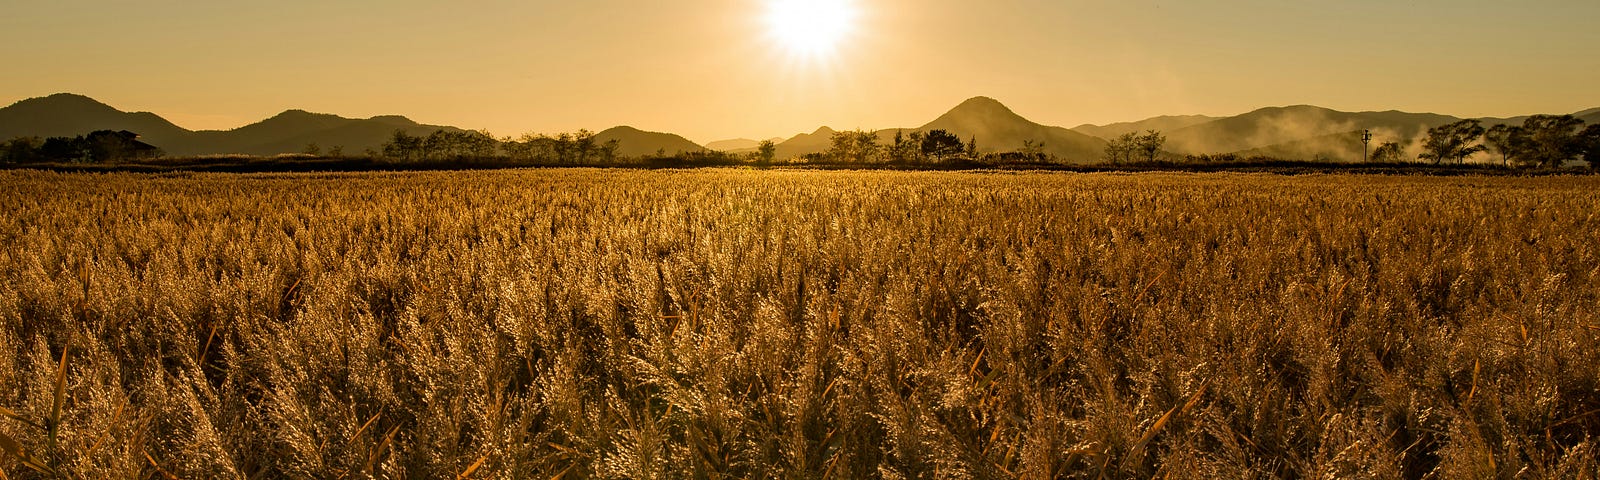 A gorgeous low sun shining strong over a wheat field with mountains in the background.